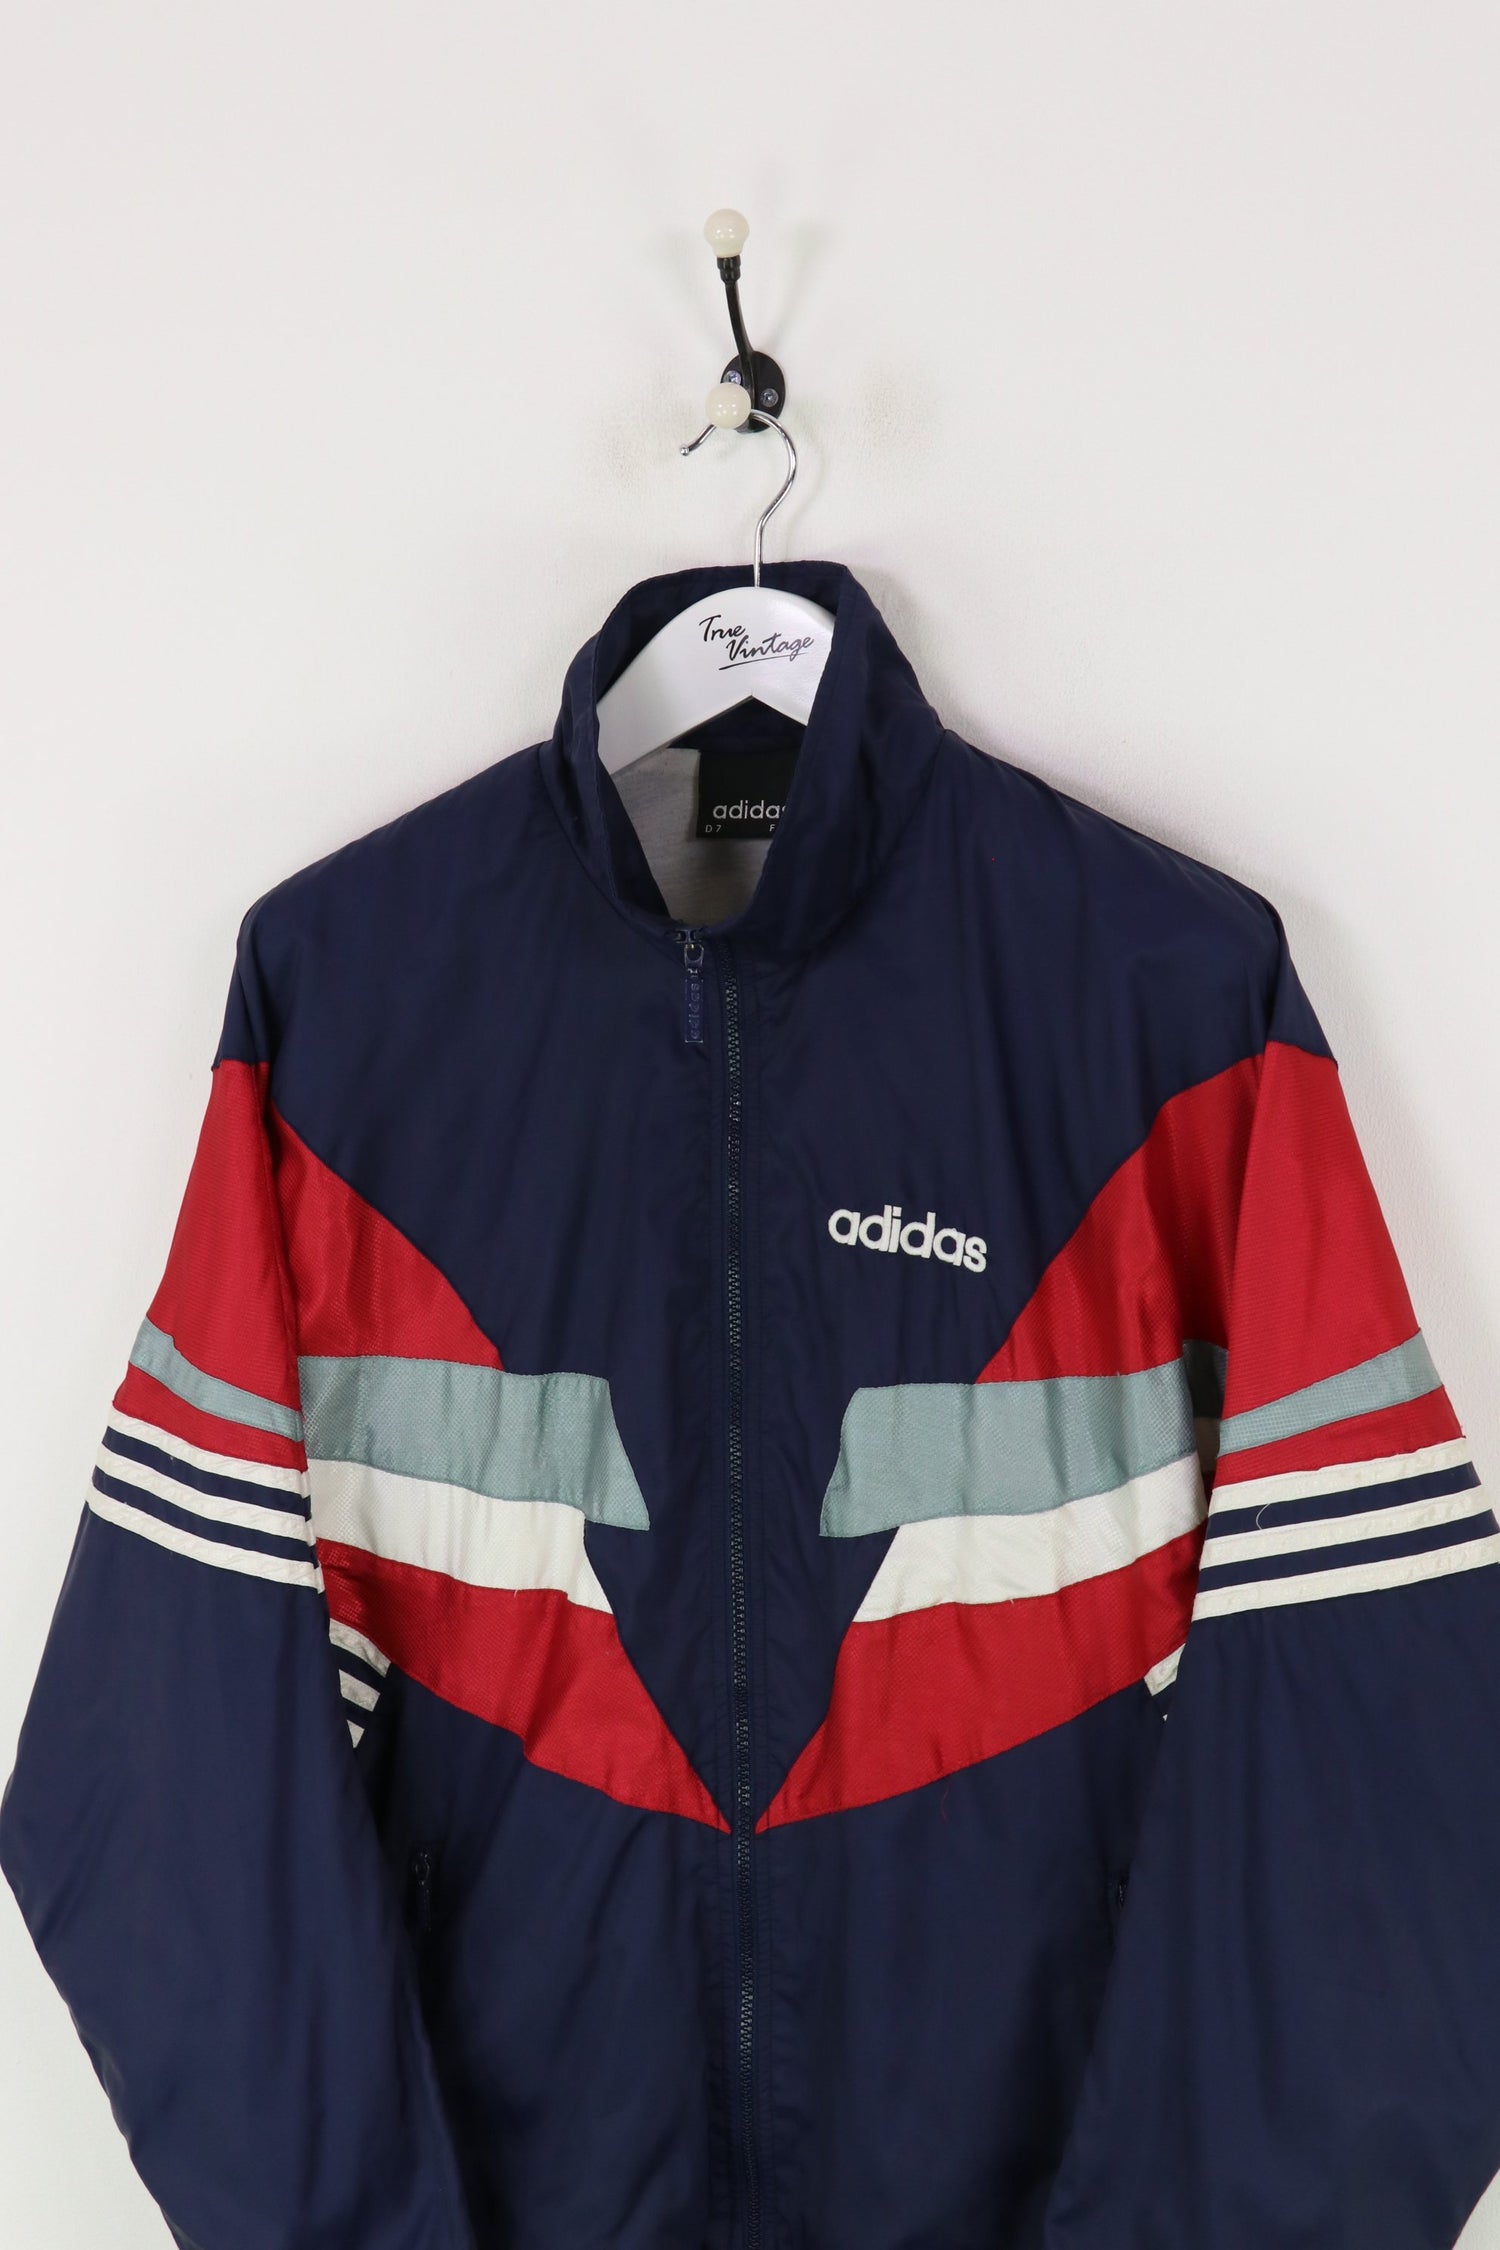 Adidas Shell Suit Jacket Navy/Red Large